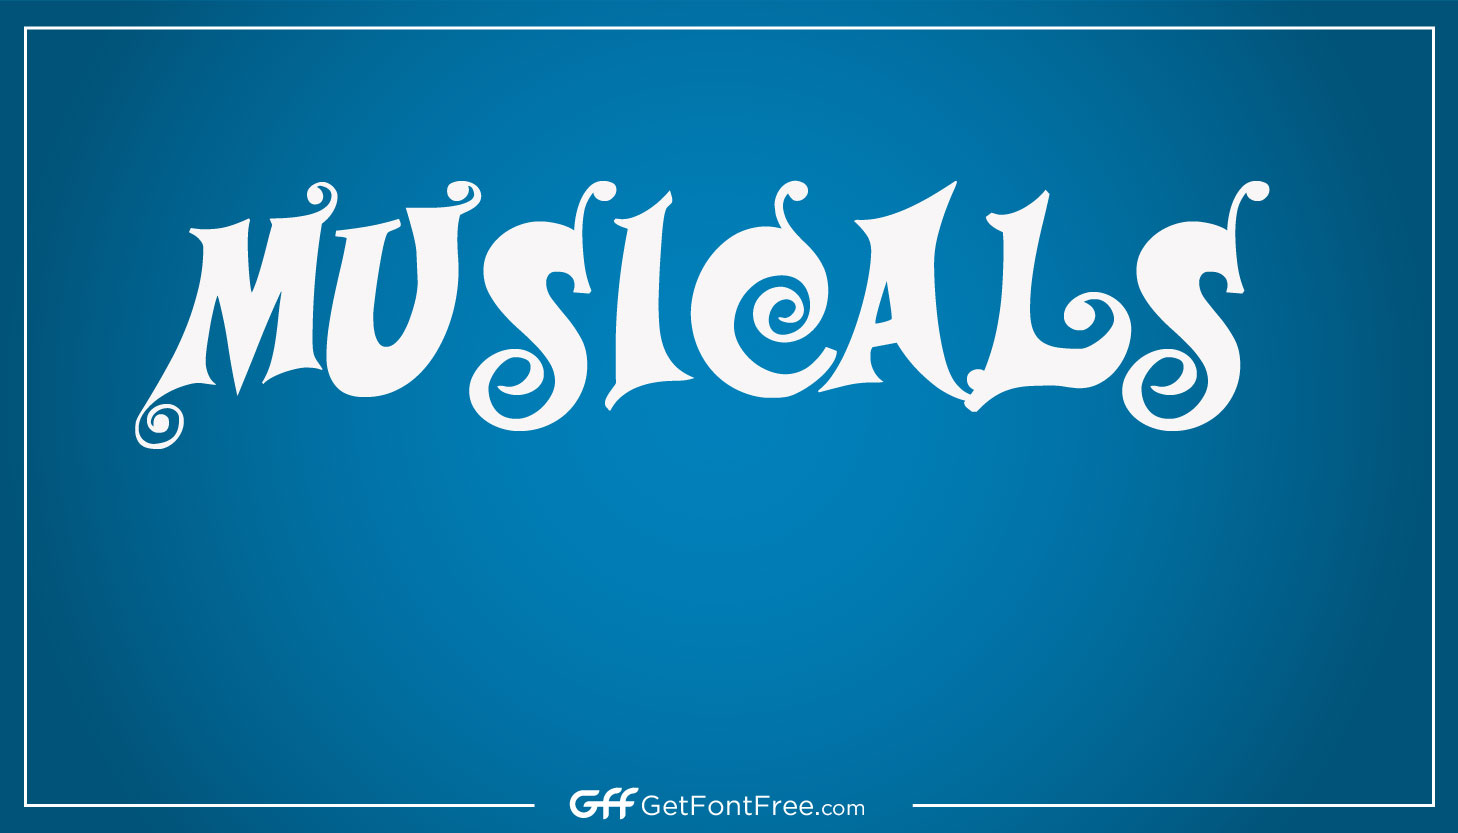 Musicals Font is a typeface that is commonly associated with the world of theater and musicals. It is a decorative font that often features bold, stylized lettering with ornate flourishes and curves. The history of Musicals Font can be traced back to the early days of theater when show posters and playbills were designed to catch the eye and attract audiences.